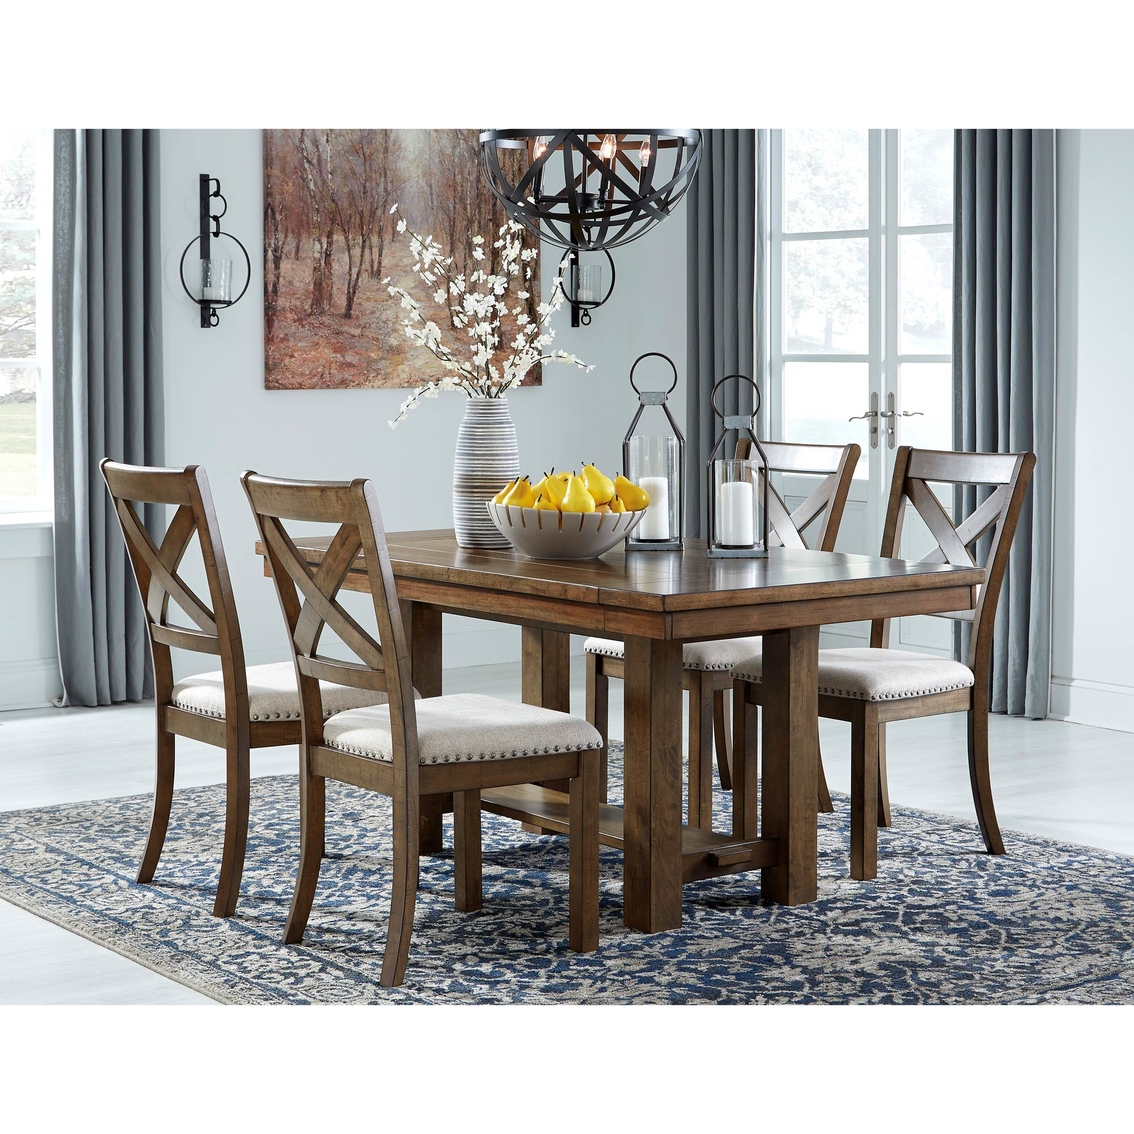 Signature Design by Ashley Moriville Rectangular Dining Room Extension Table - Image 2 of 4